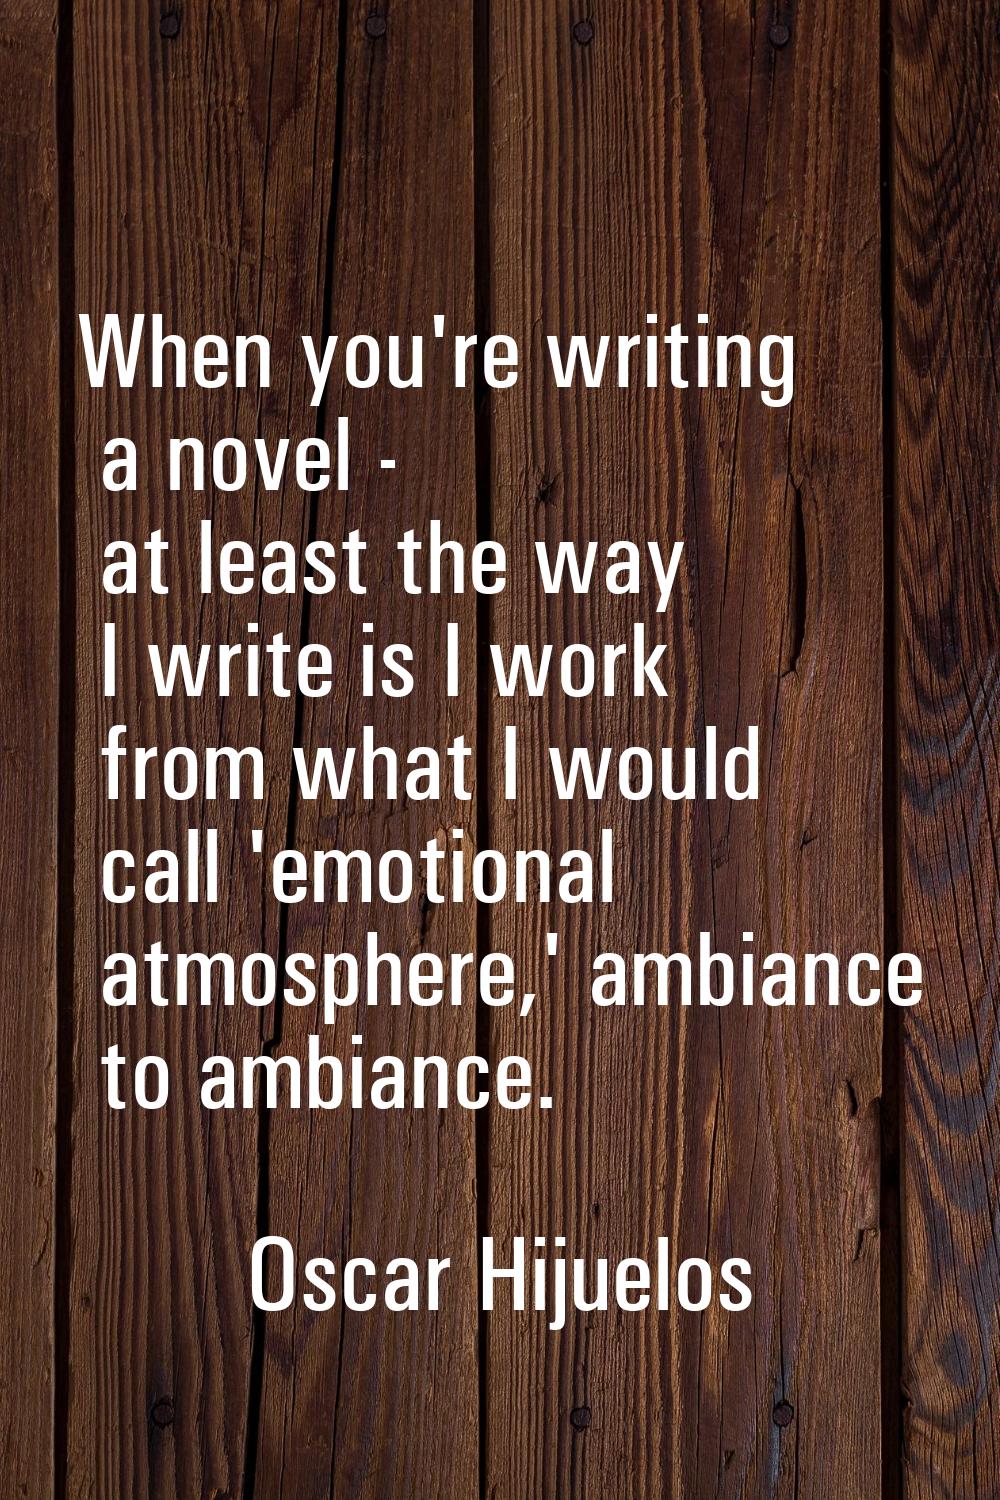 When you're writing a novel - at least the way I write is I work from what I would call 'emotional 